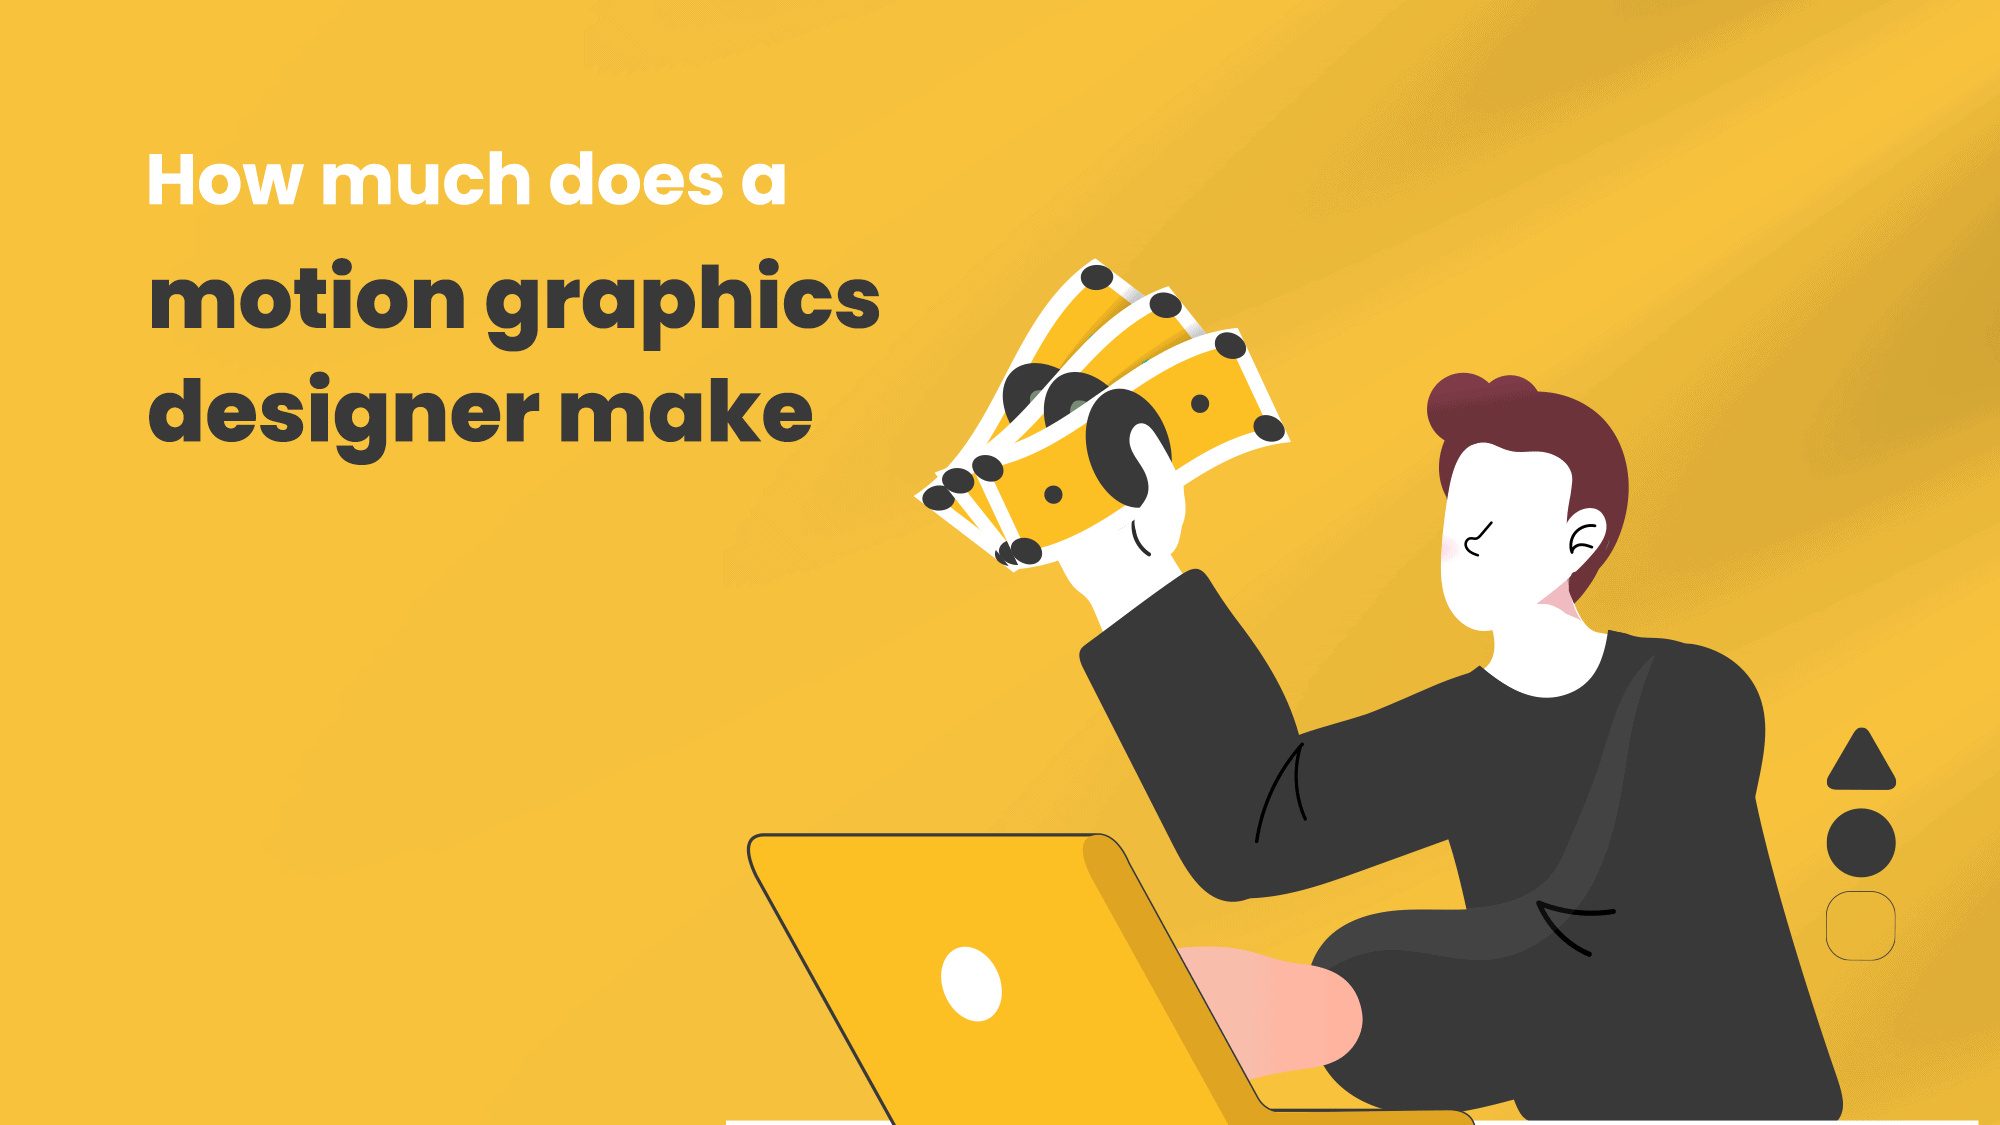 How much does a motion graphics designer make